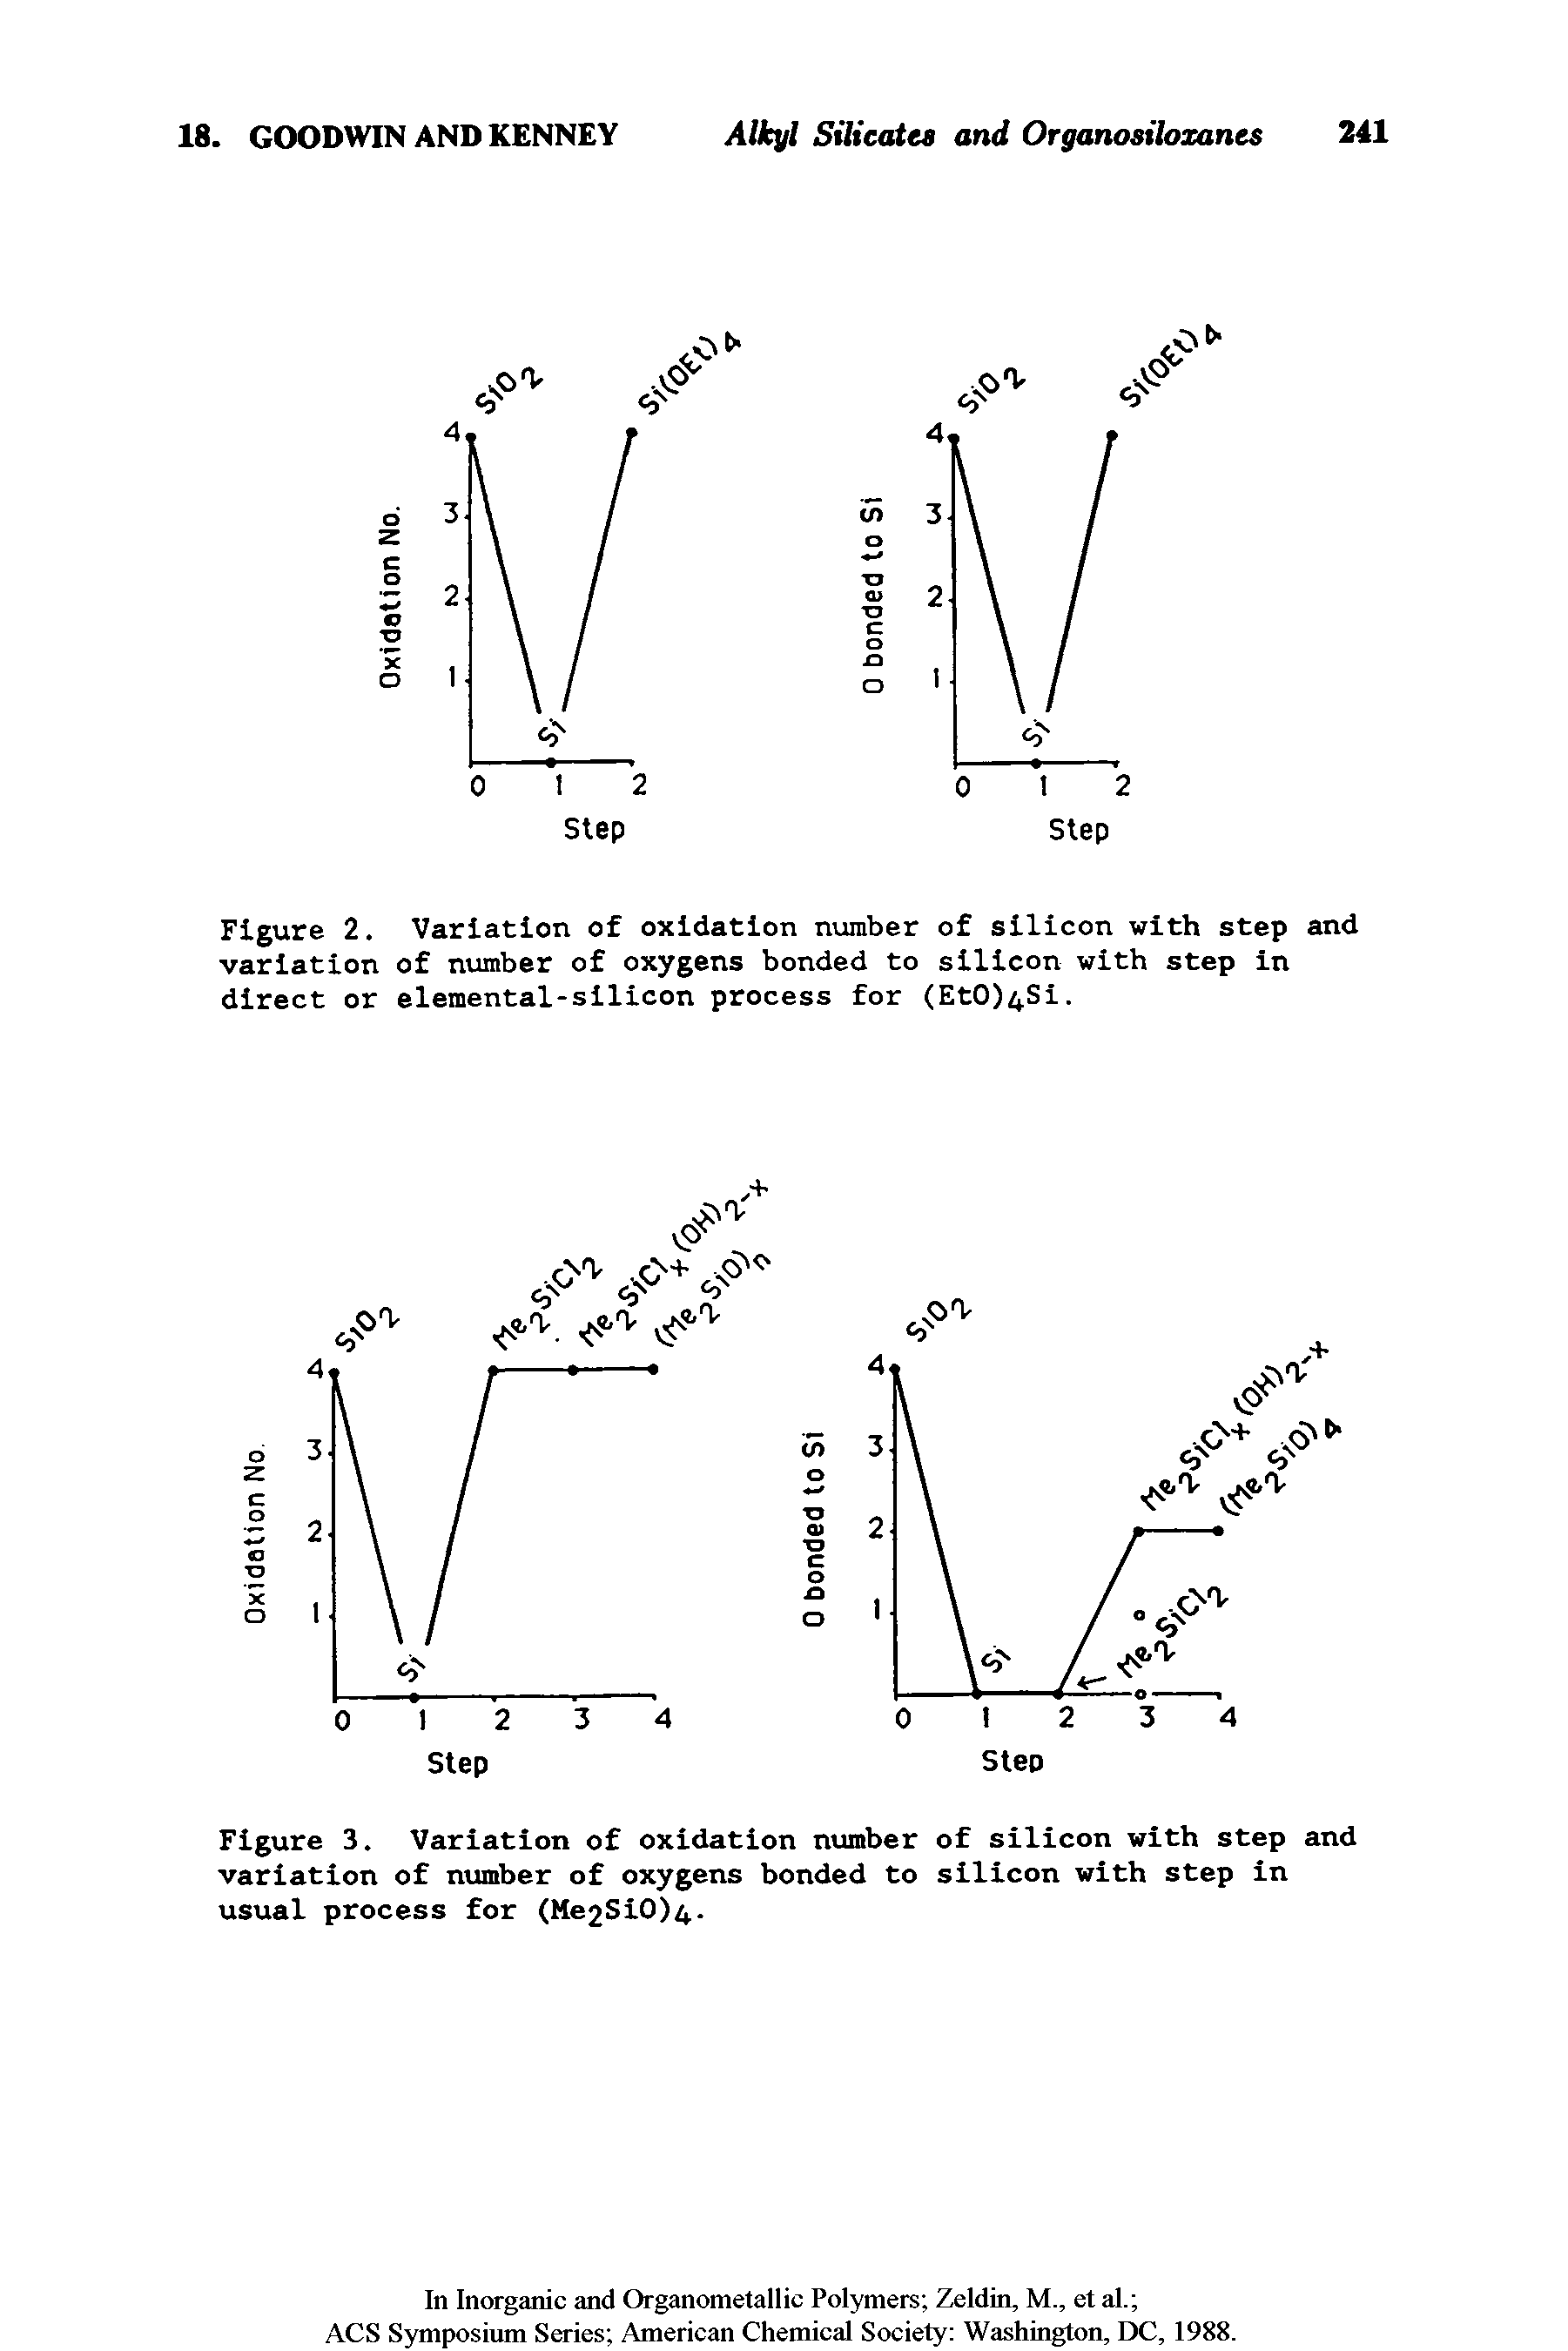 Figure 2. Variation of oxidation number of silicon with step and variation of number of oxygens bonded to silicon with step in direct or elemental-silicon process for (EtOJ Si.